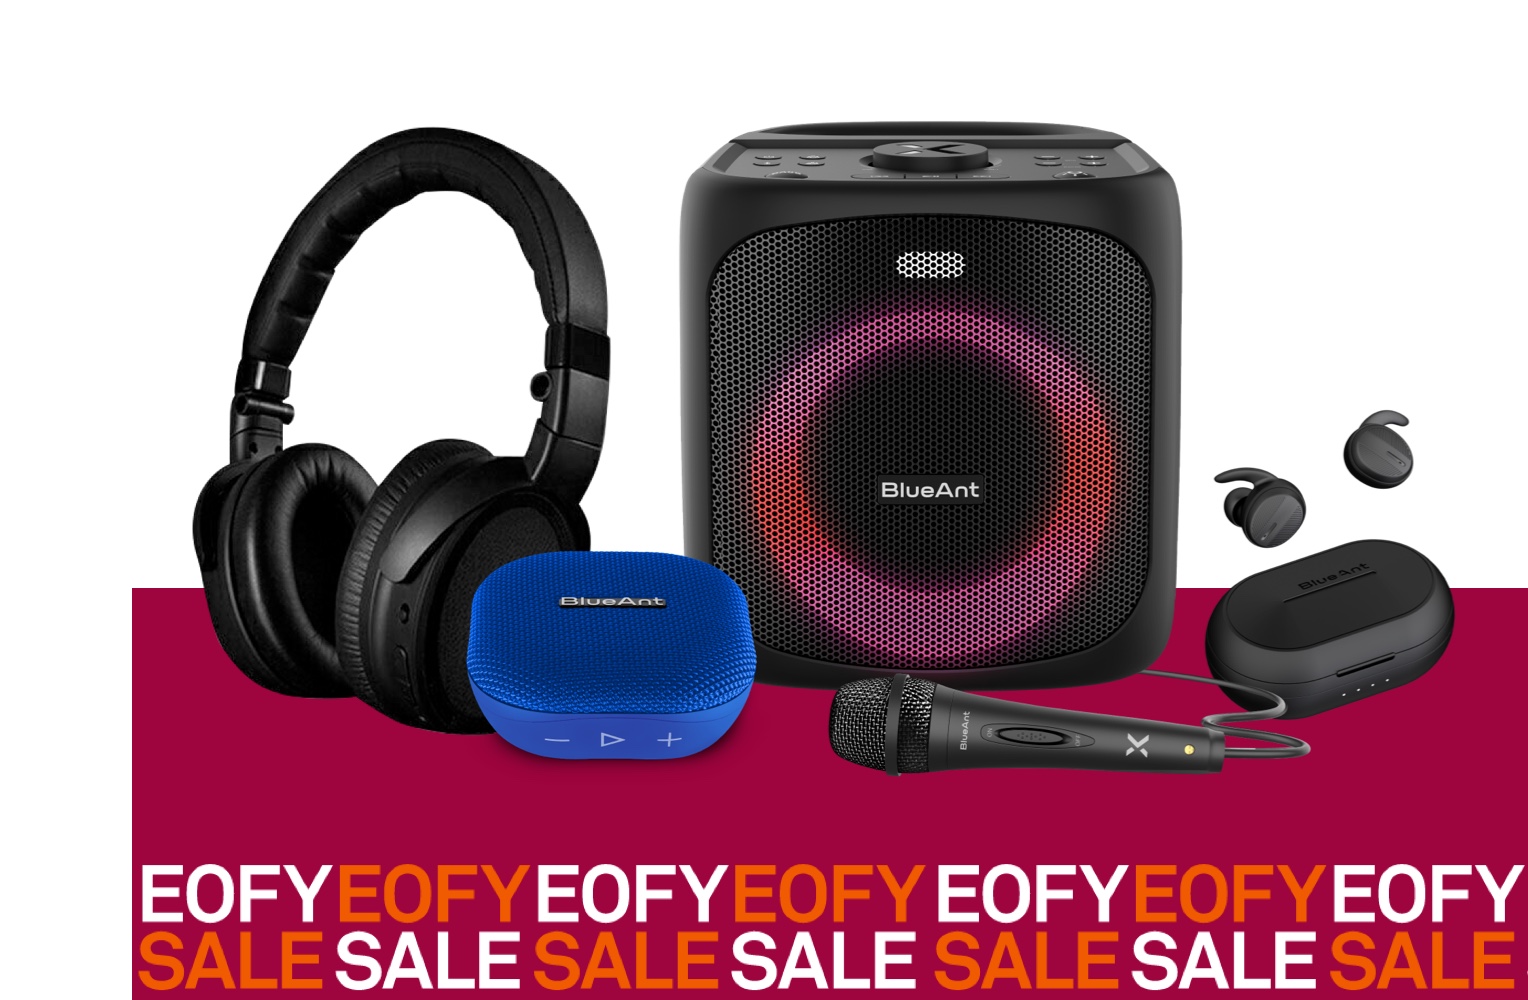 Save up to 50% on a range of speakers, headphones and more.